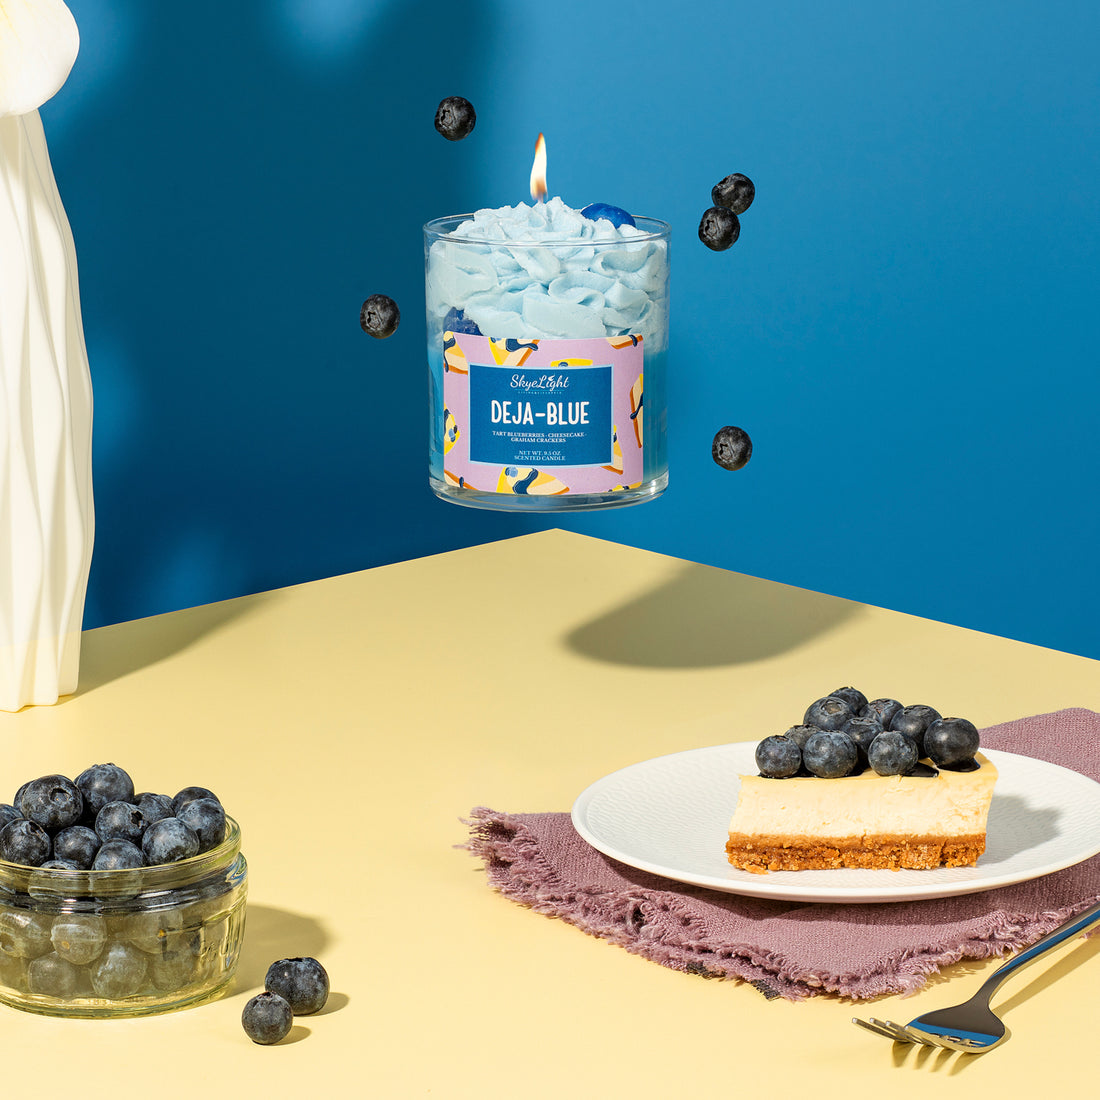 Blueberry Candle- Blueberry Cobbler candle- Blueberry Cheesecake candles-  dessert candles- gift candle- food candle- blue candle